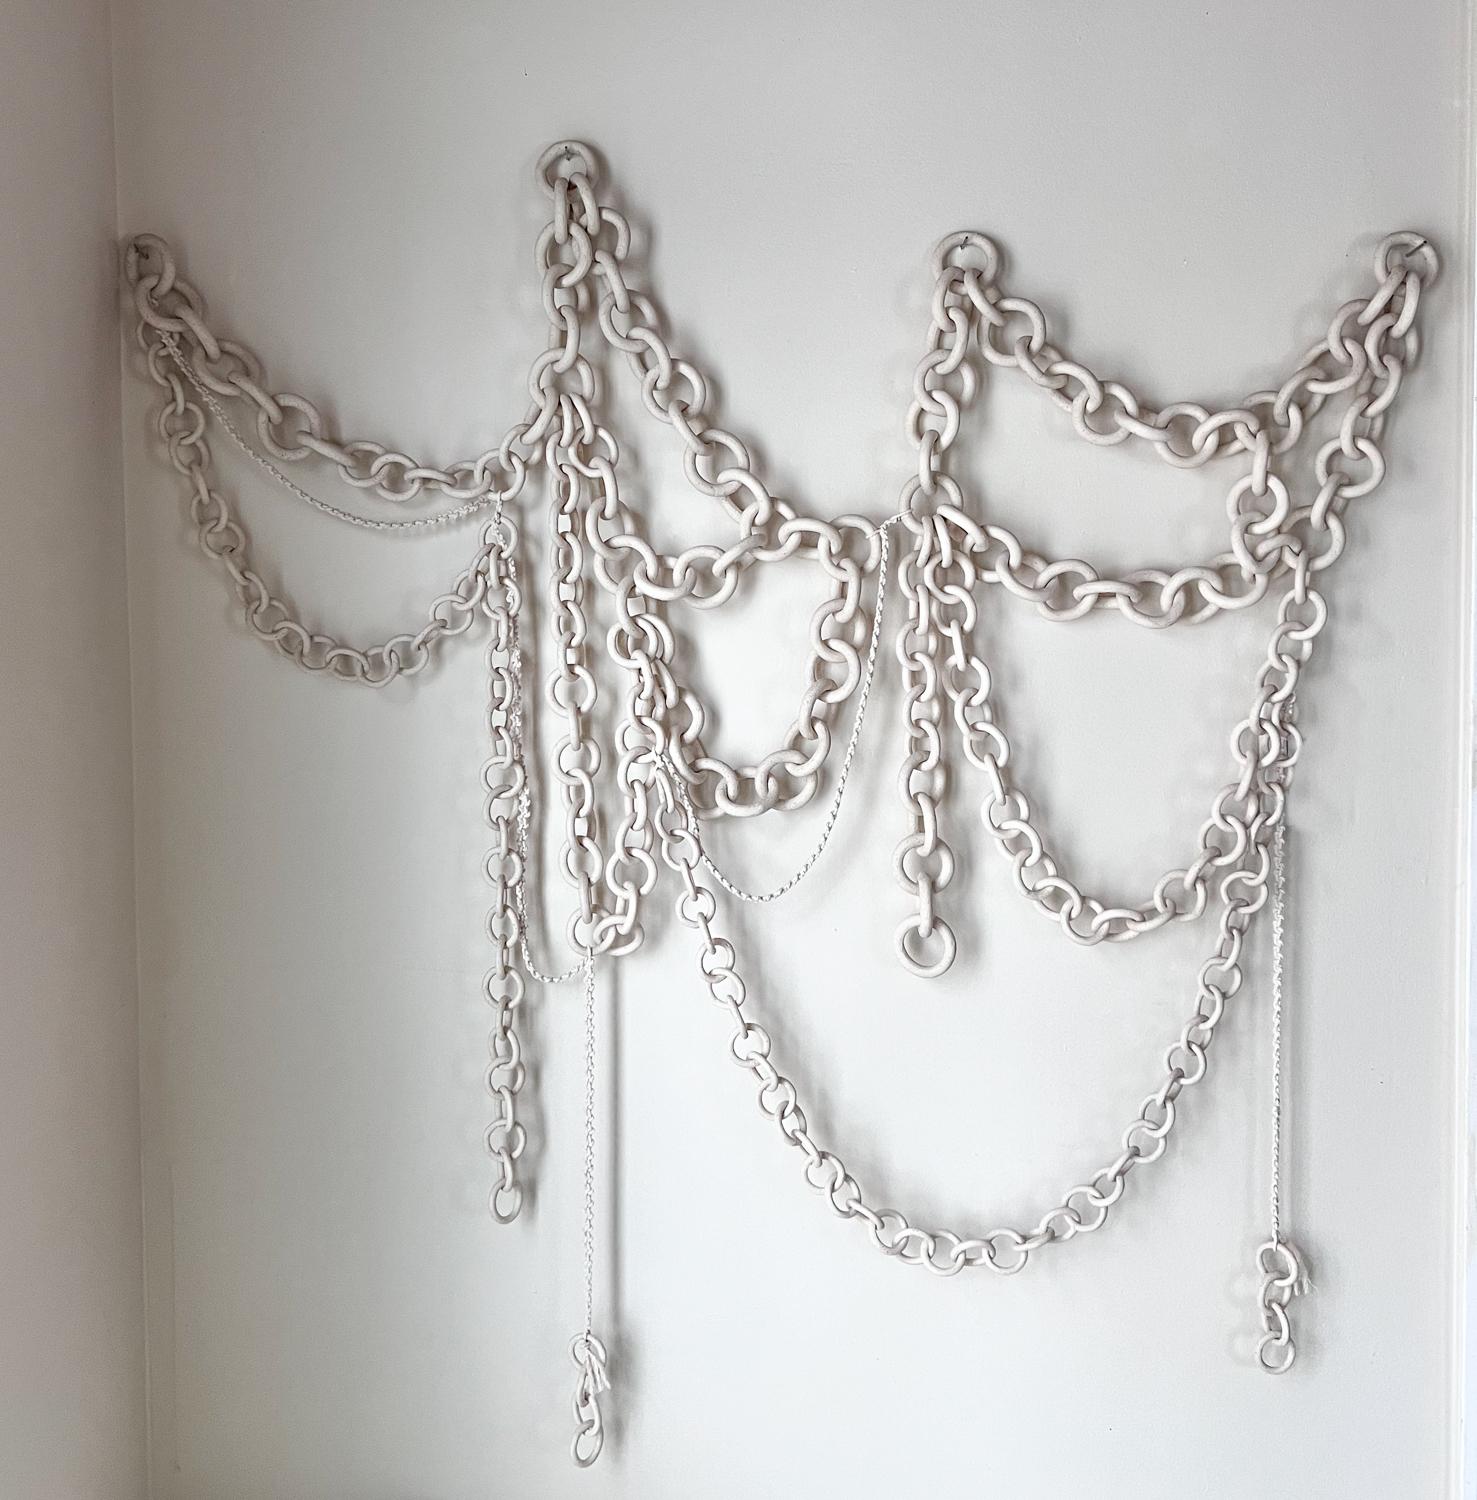 Ceramic Link Chain Wall Sculpture For Sale 2